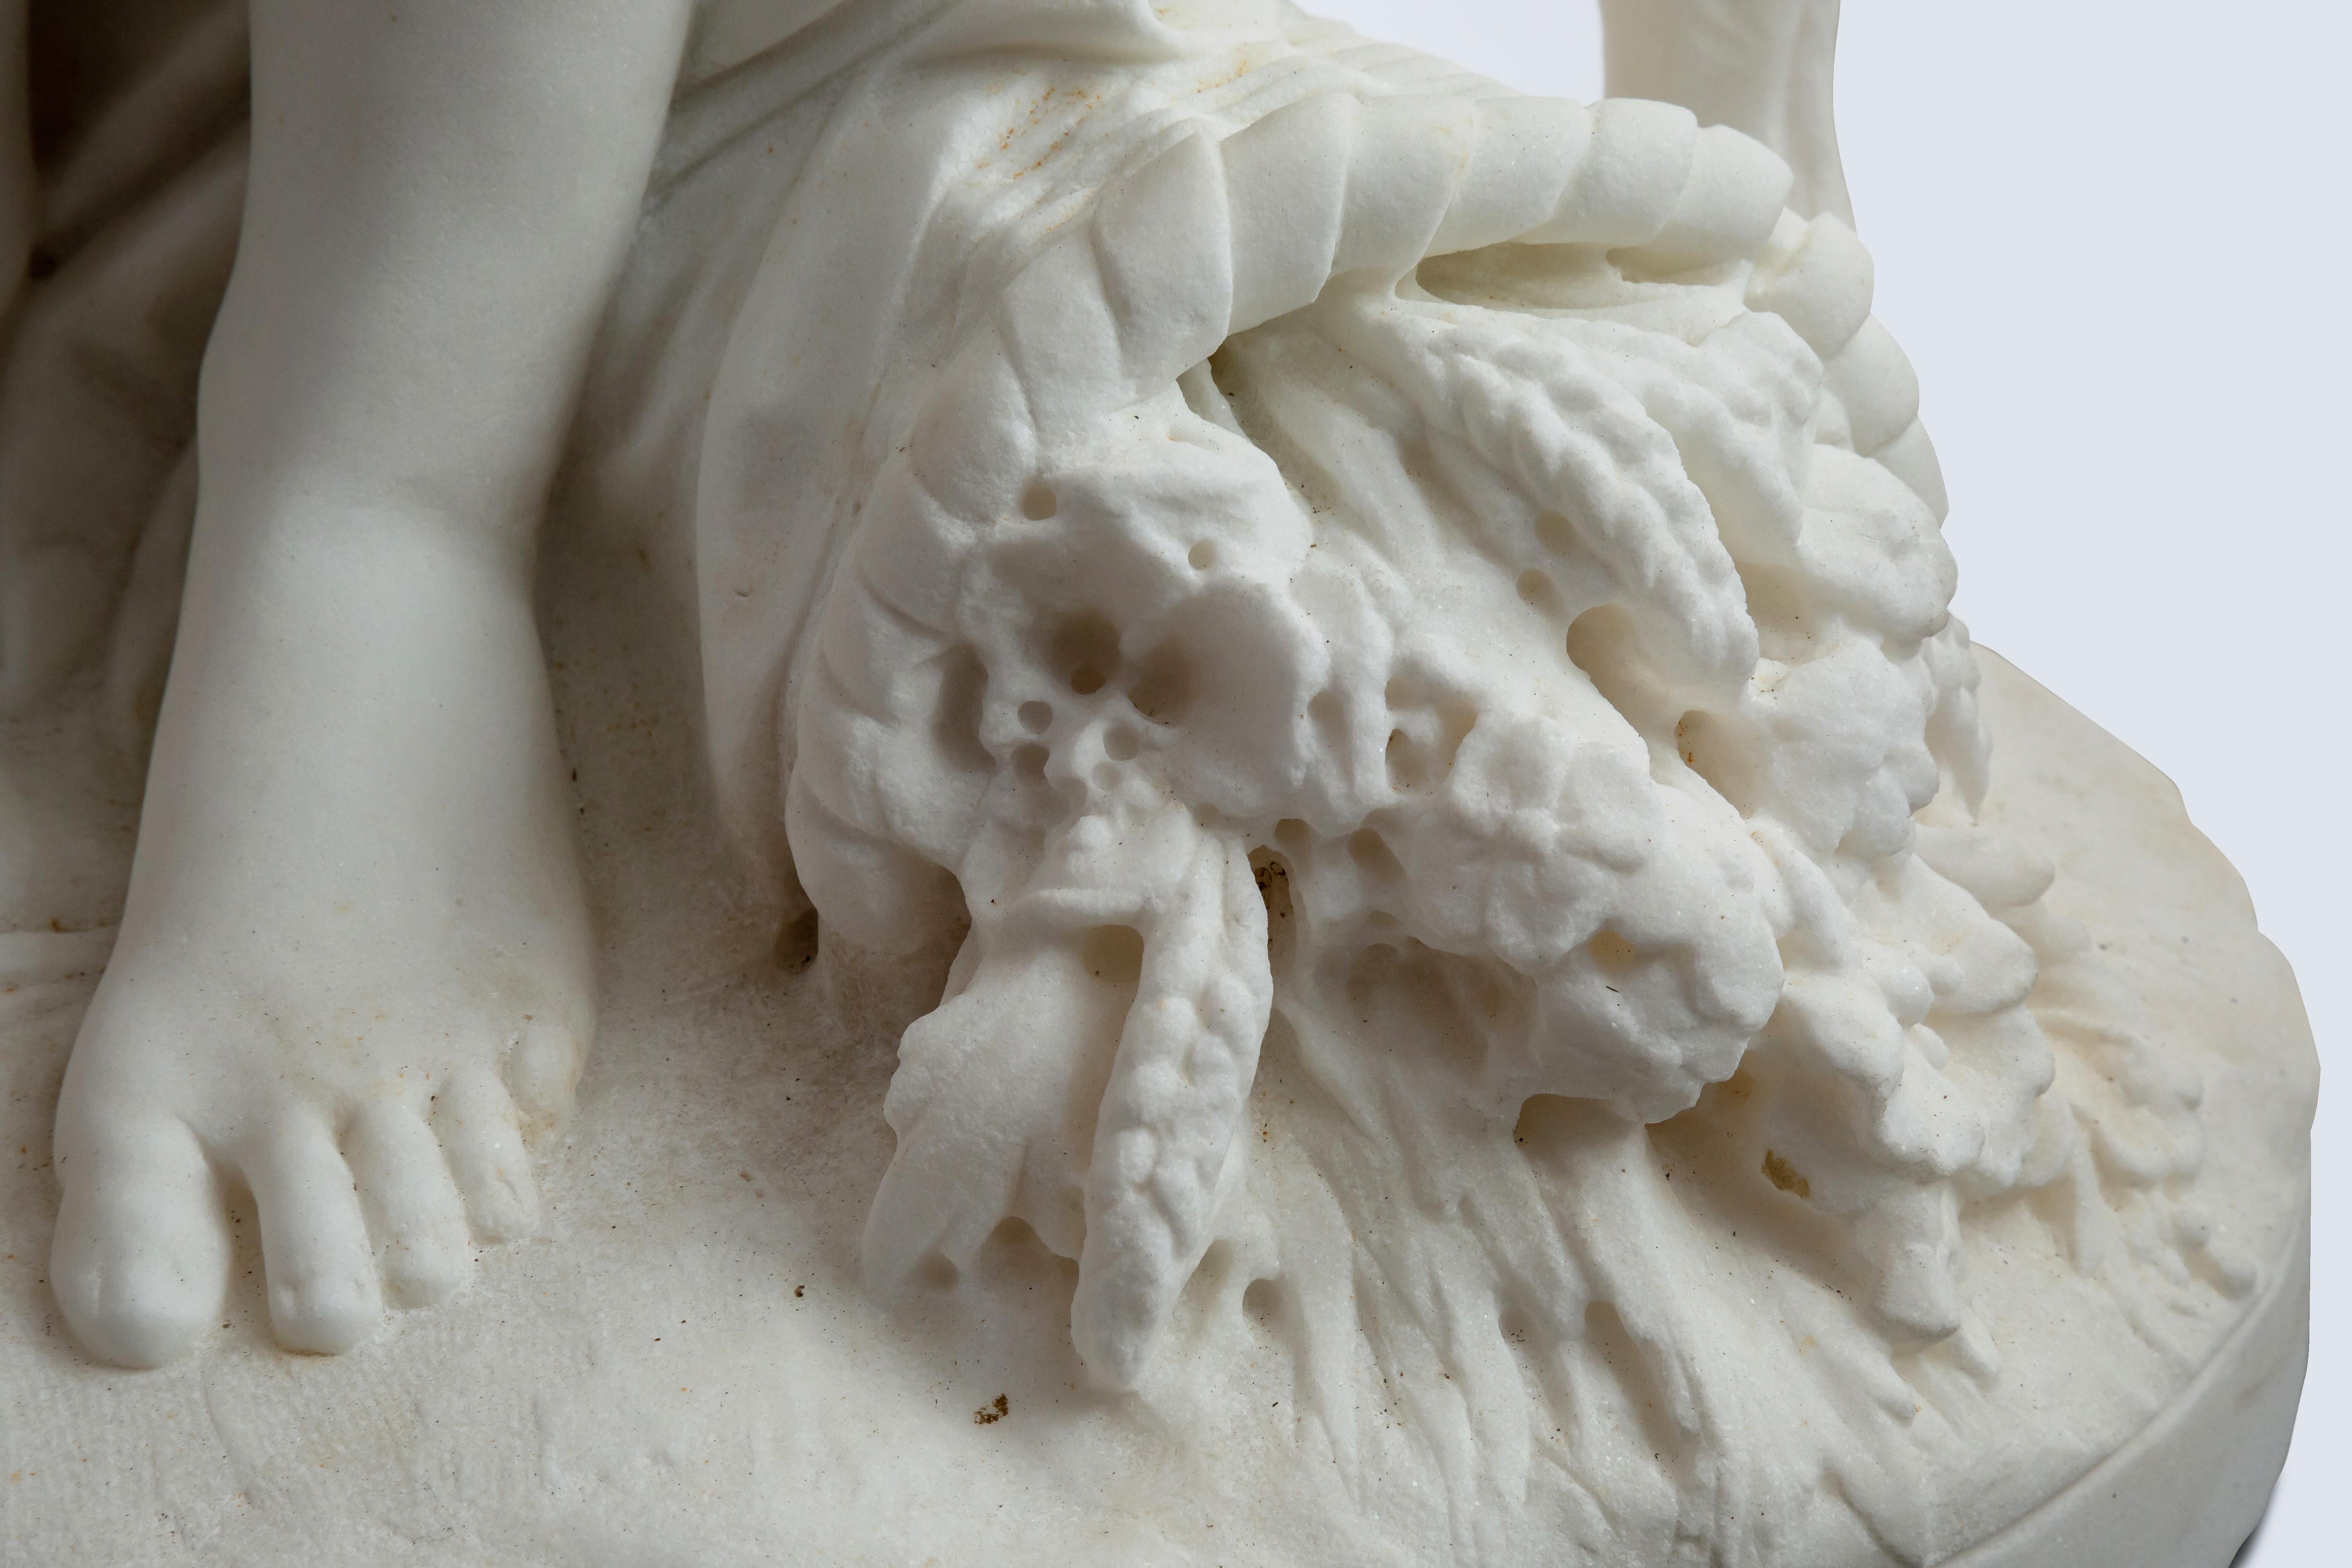 Le Retour des Champs ‘Return from the Harvest’ Carrara Marble, Signed and Dated 5